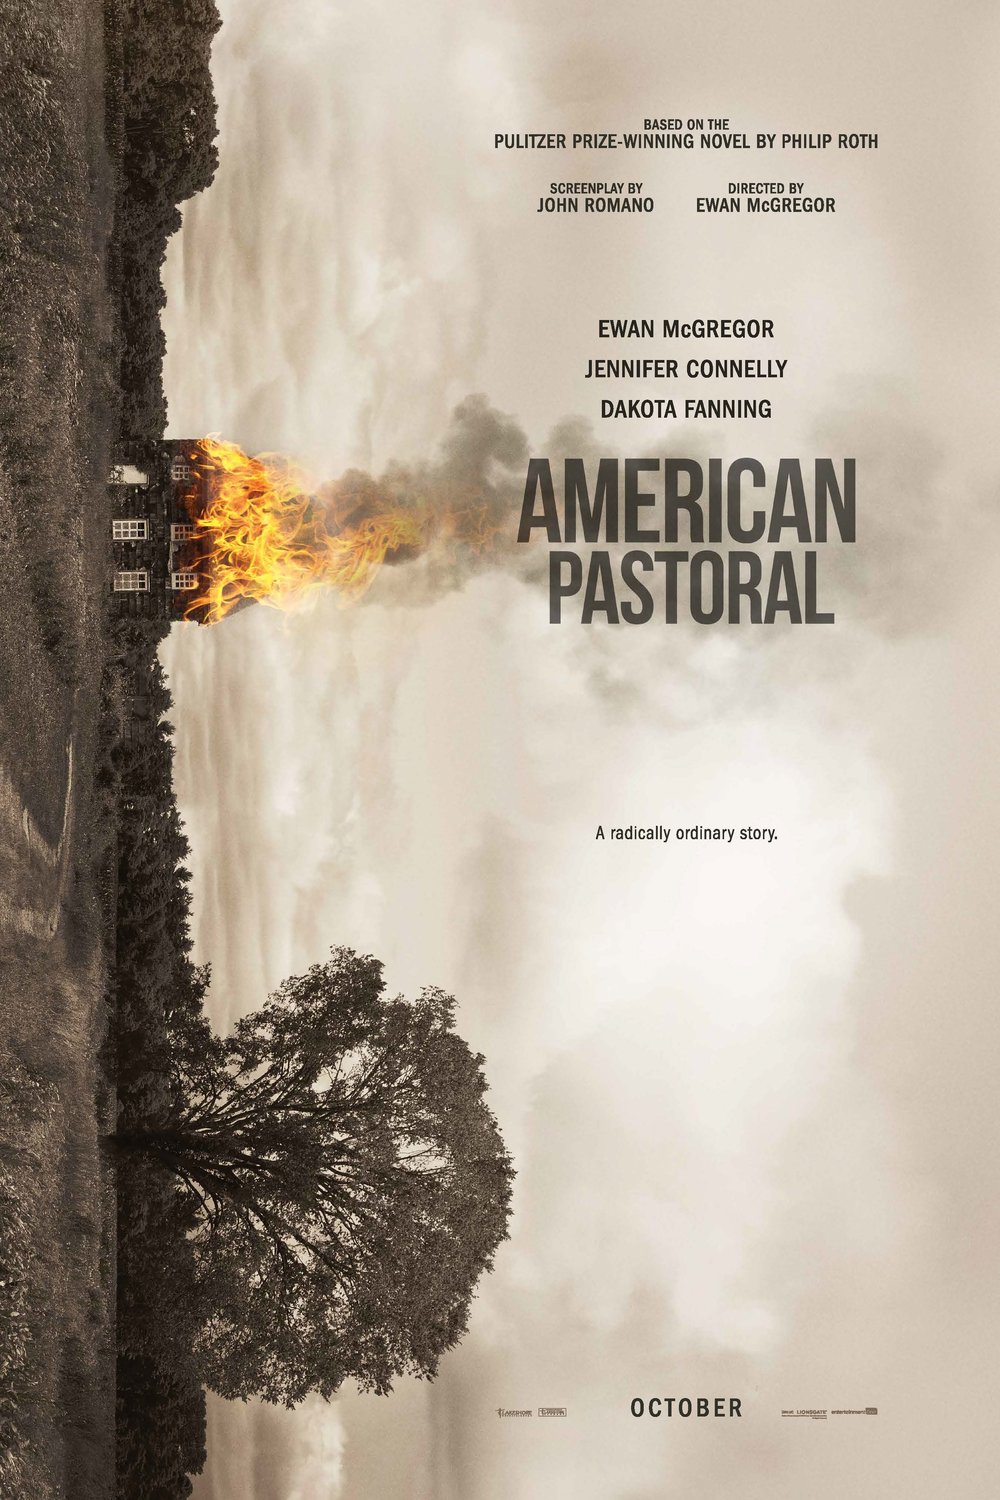 Poster of the movie American Pastoral